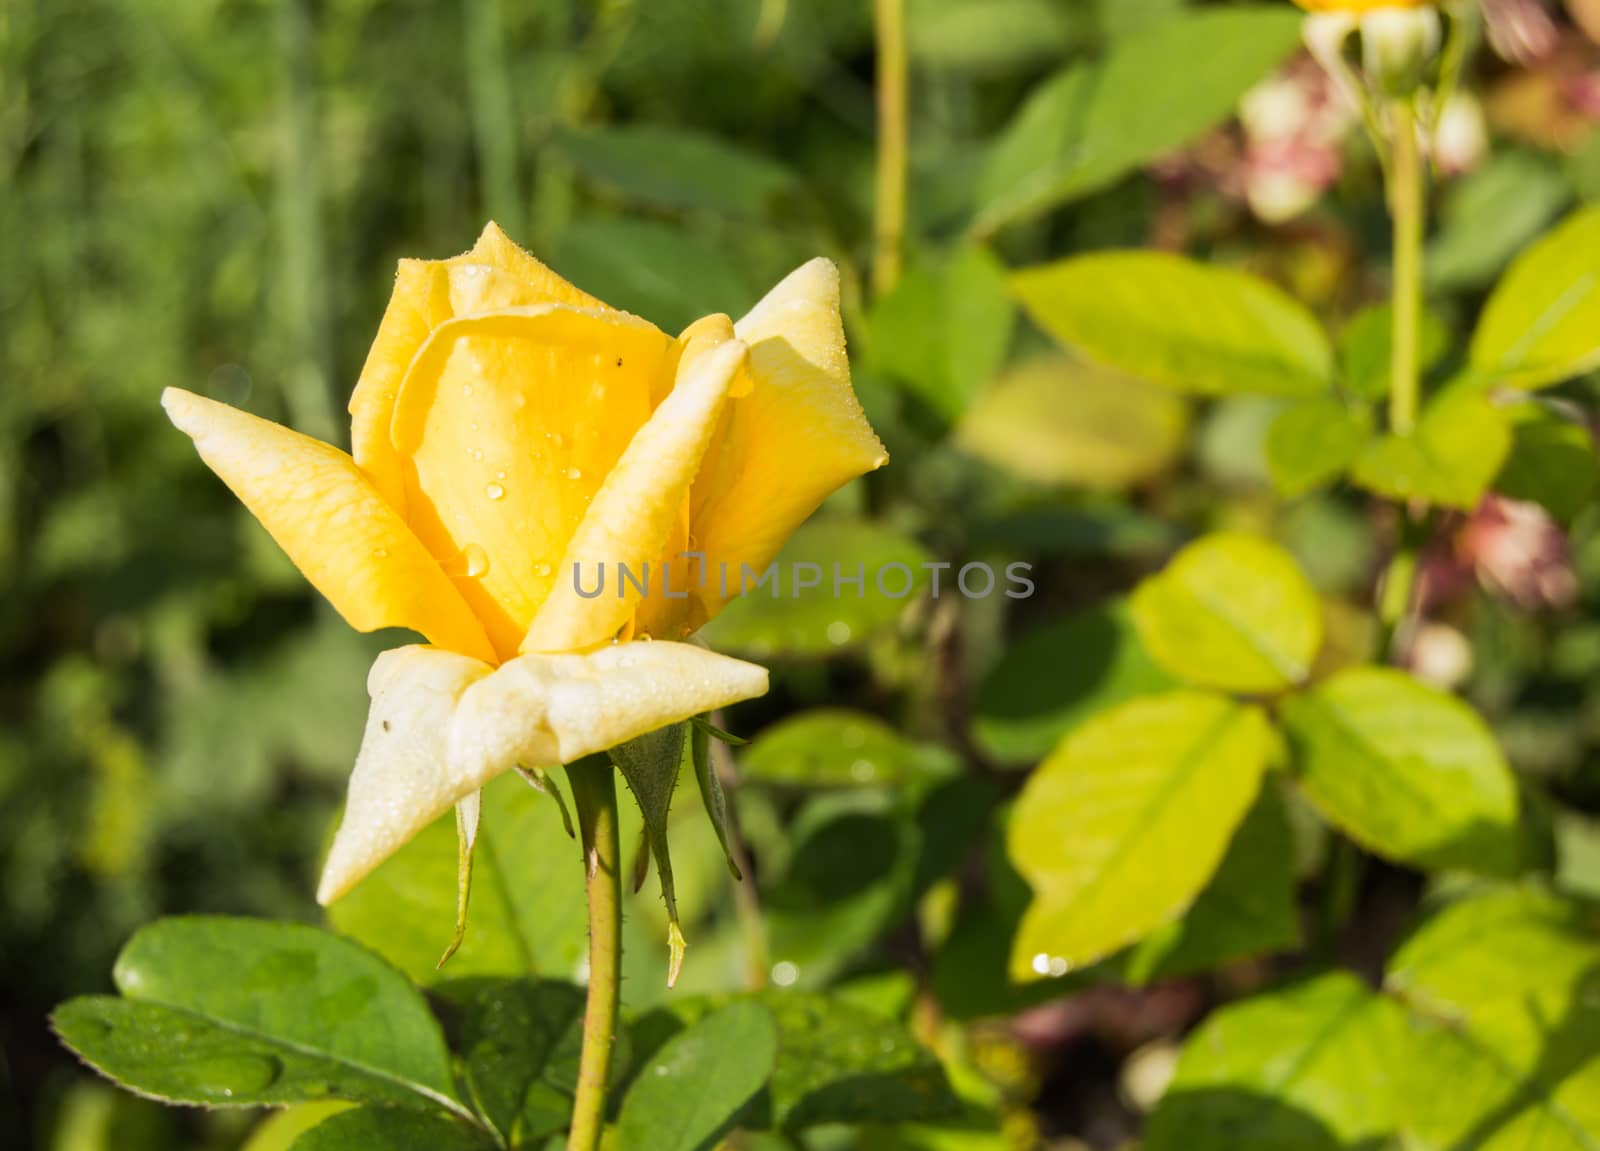 Beautiful yellow rose growing in the garden on a Sunny summer day by claire_lucia